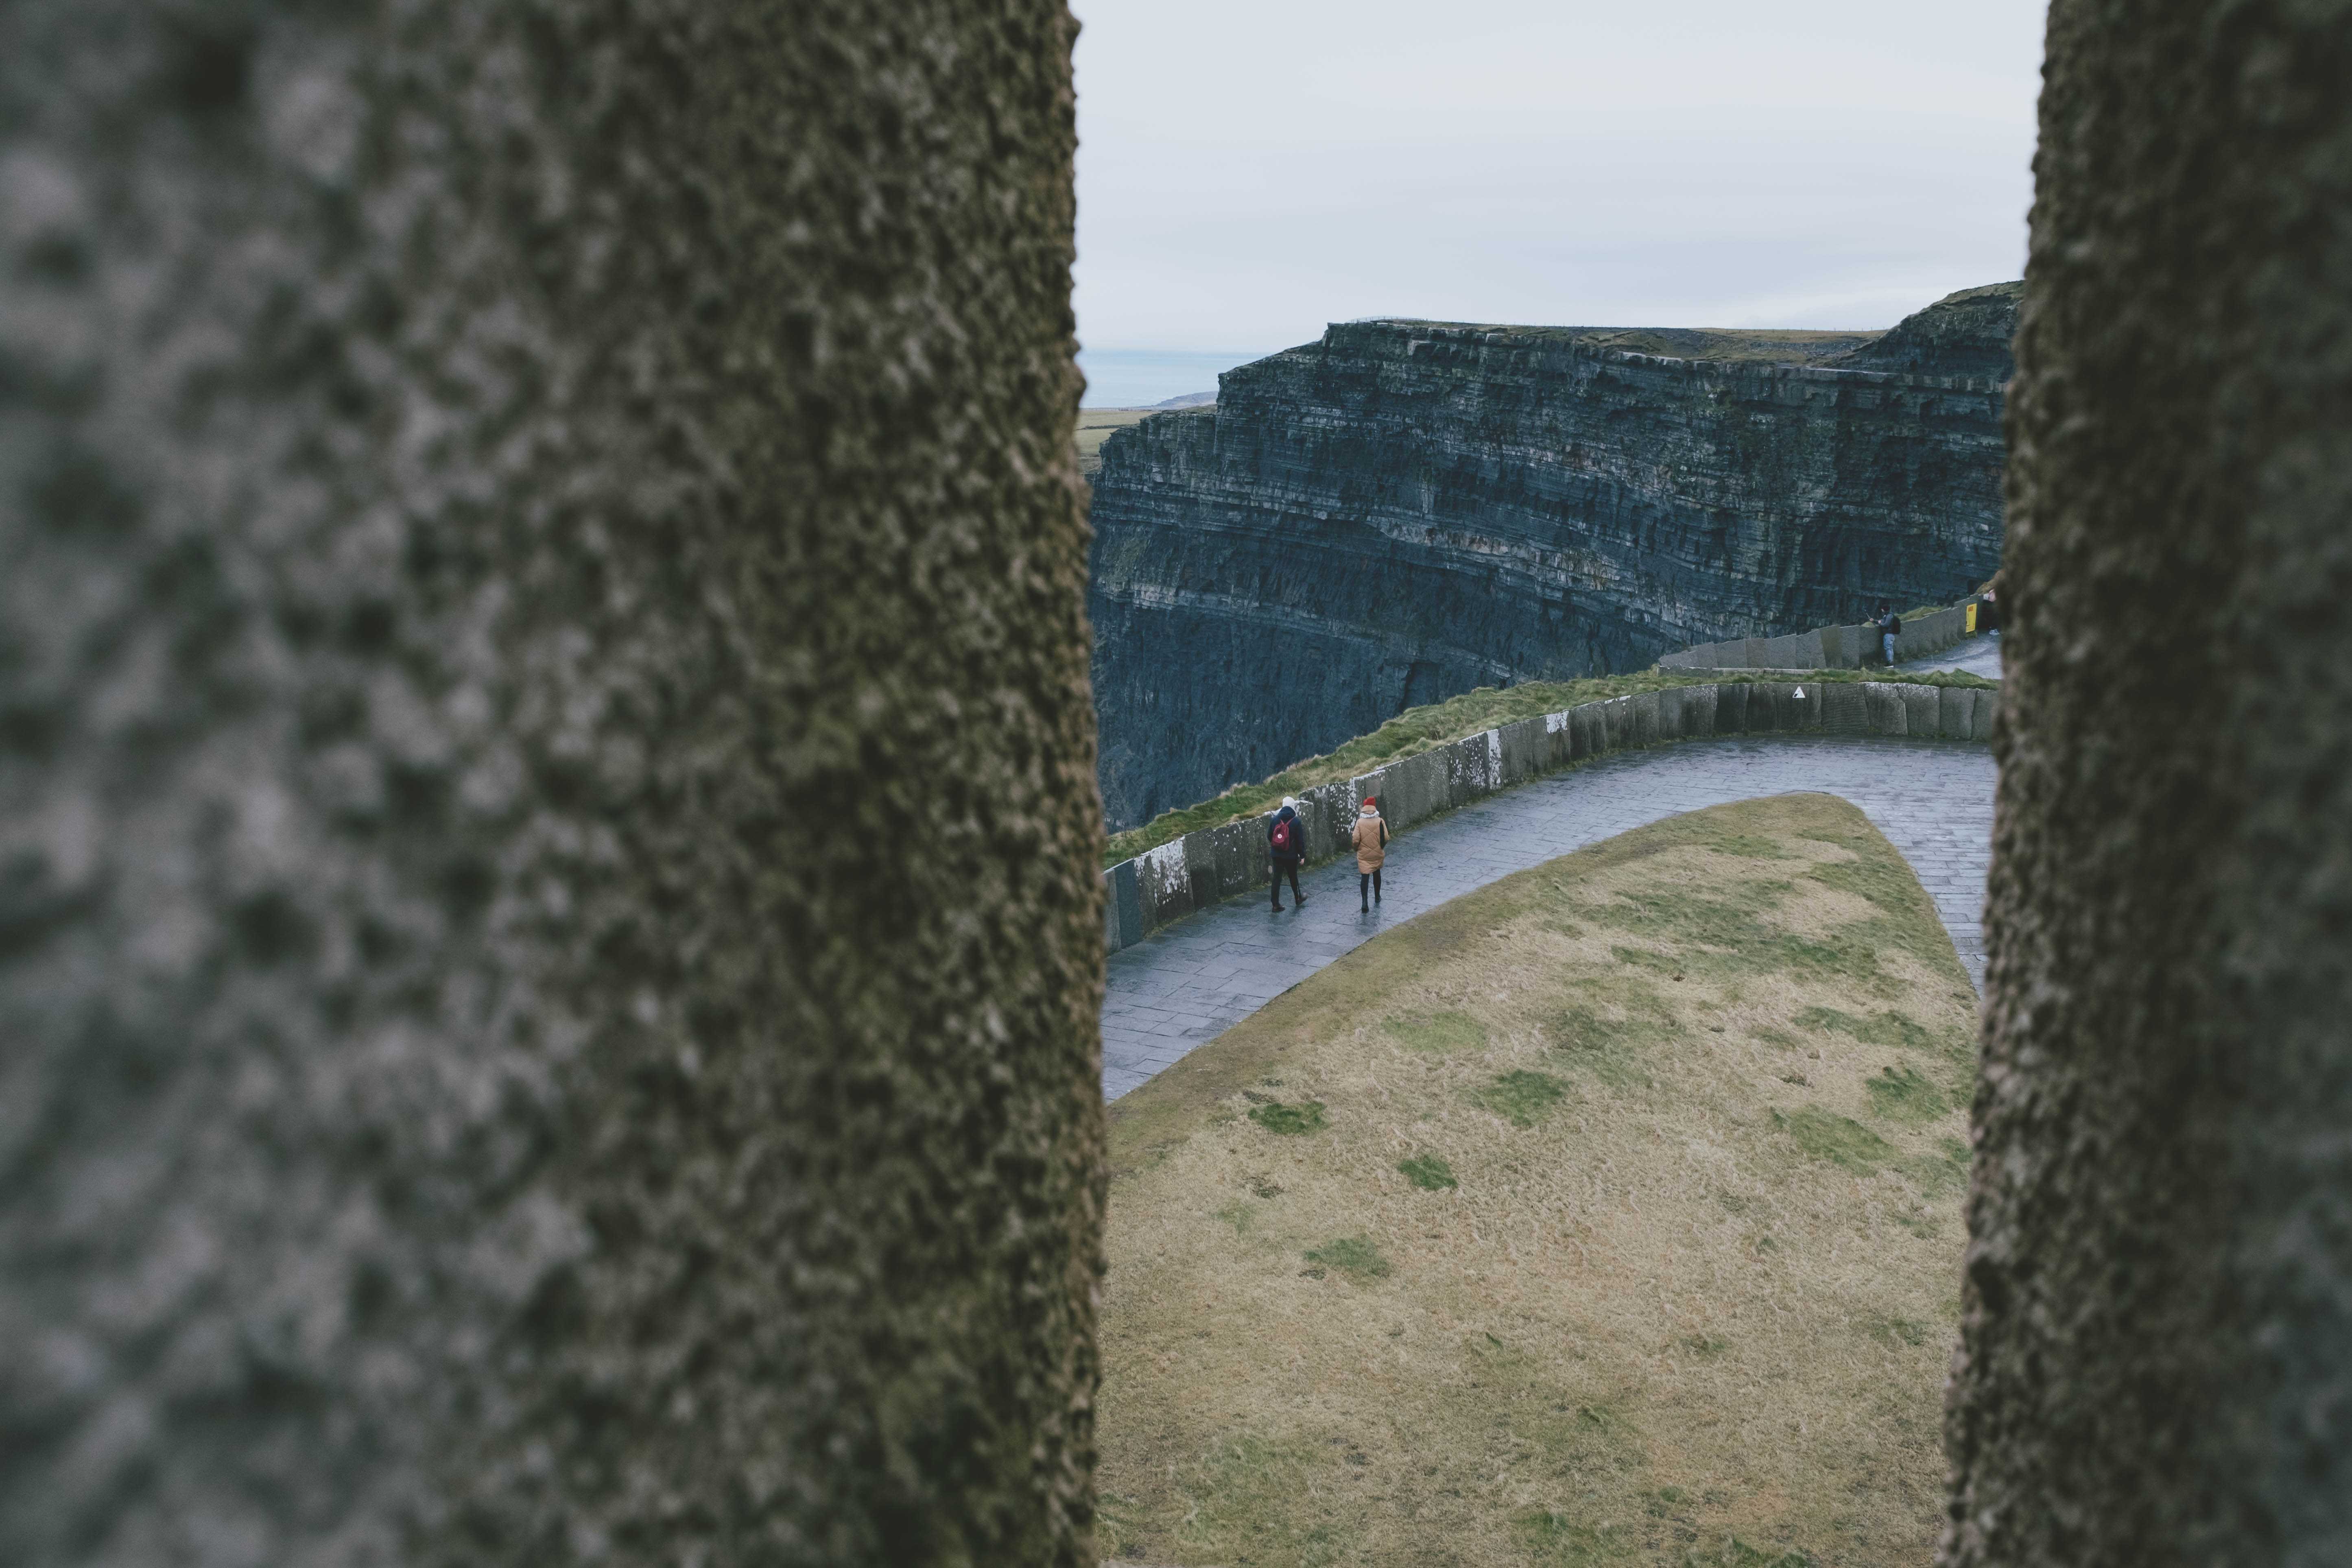 Cliffs and the walkway between a concrete structure